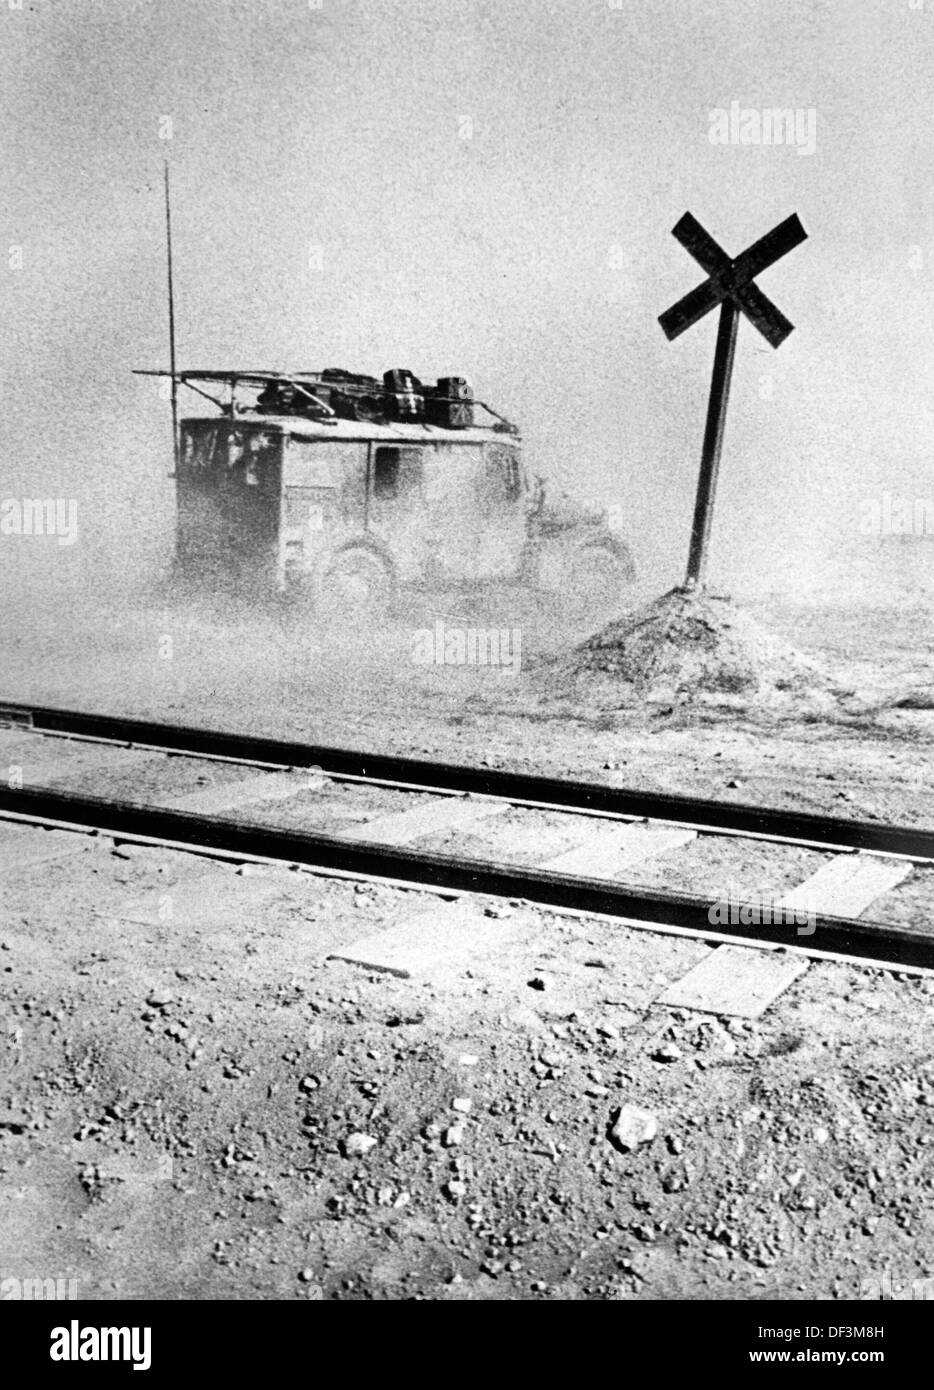 The image from the Nazi Propaganda! depicts a vehicle of the German Wehrmacht as it crosses th railway tracks of the desert railway between Marsa Matruh and Alexandria in Egypt, published on 10 July 1942. Fotoarchiv für Zeitgeschichte Stock Photo